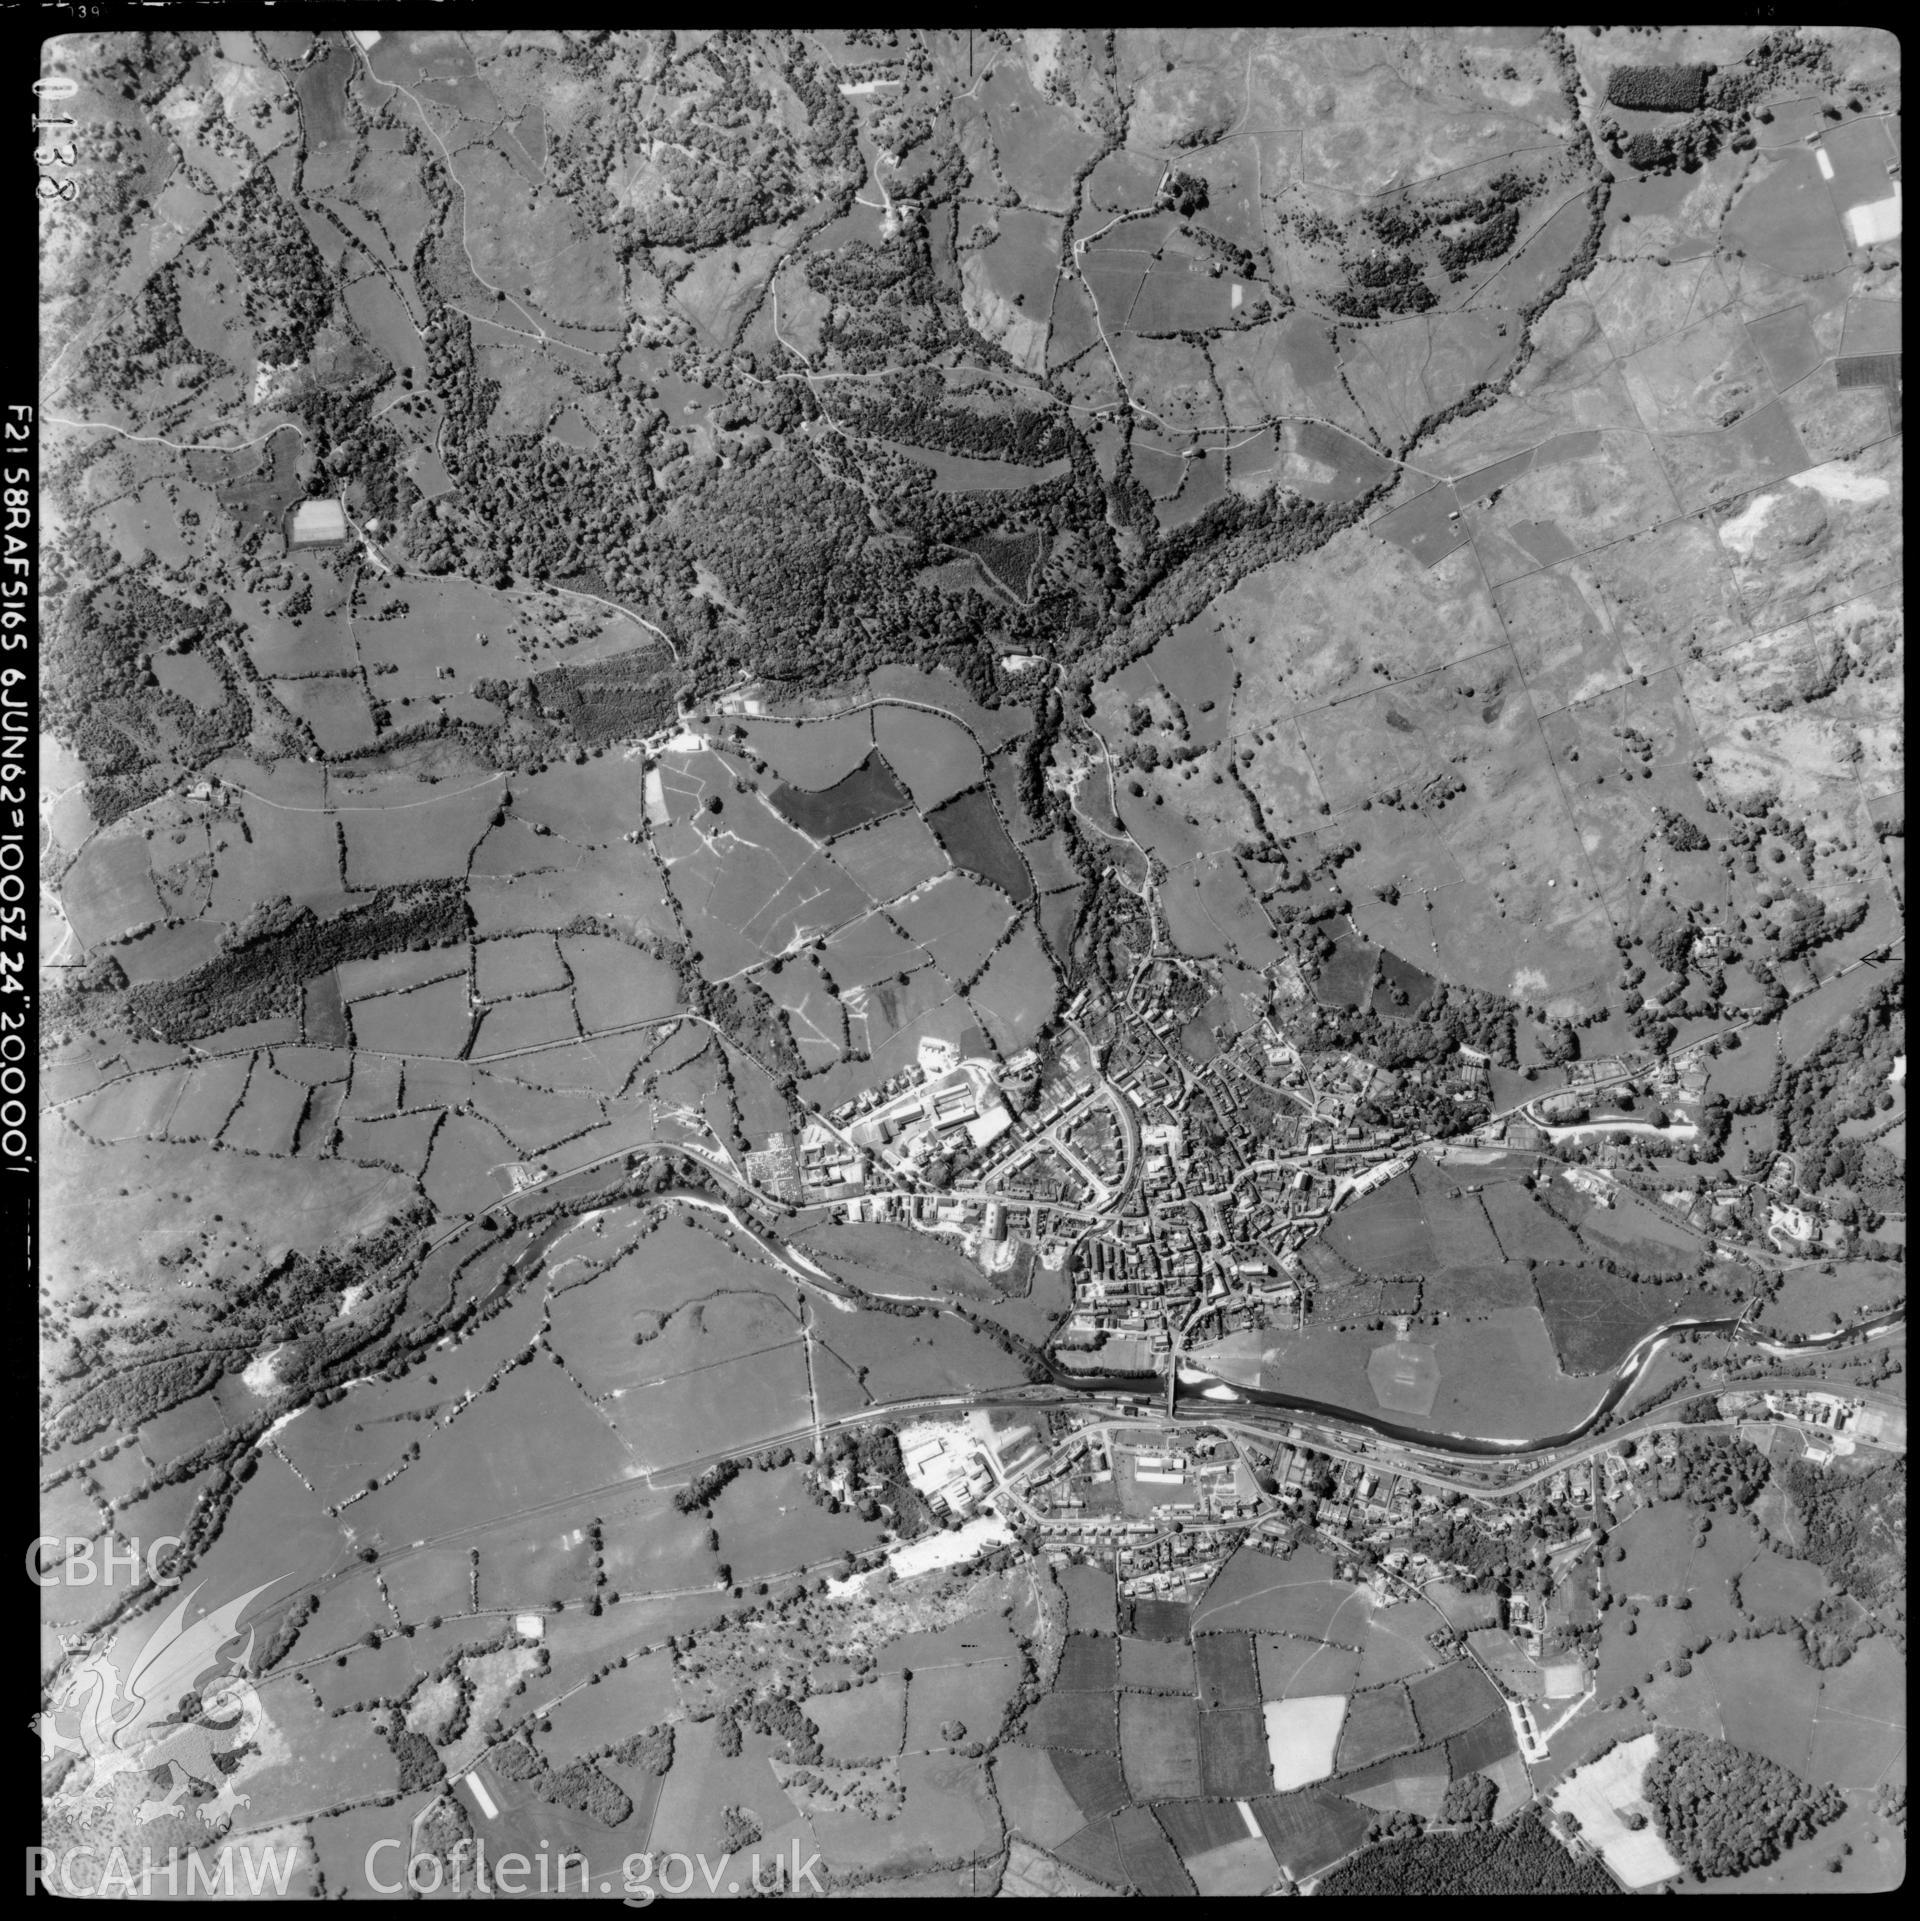 Black and white vertical aerial photograph, taken in 1962 by the RAF, showing the  Dolgellau area at a height of 20,000'